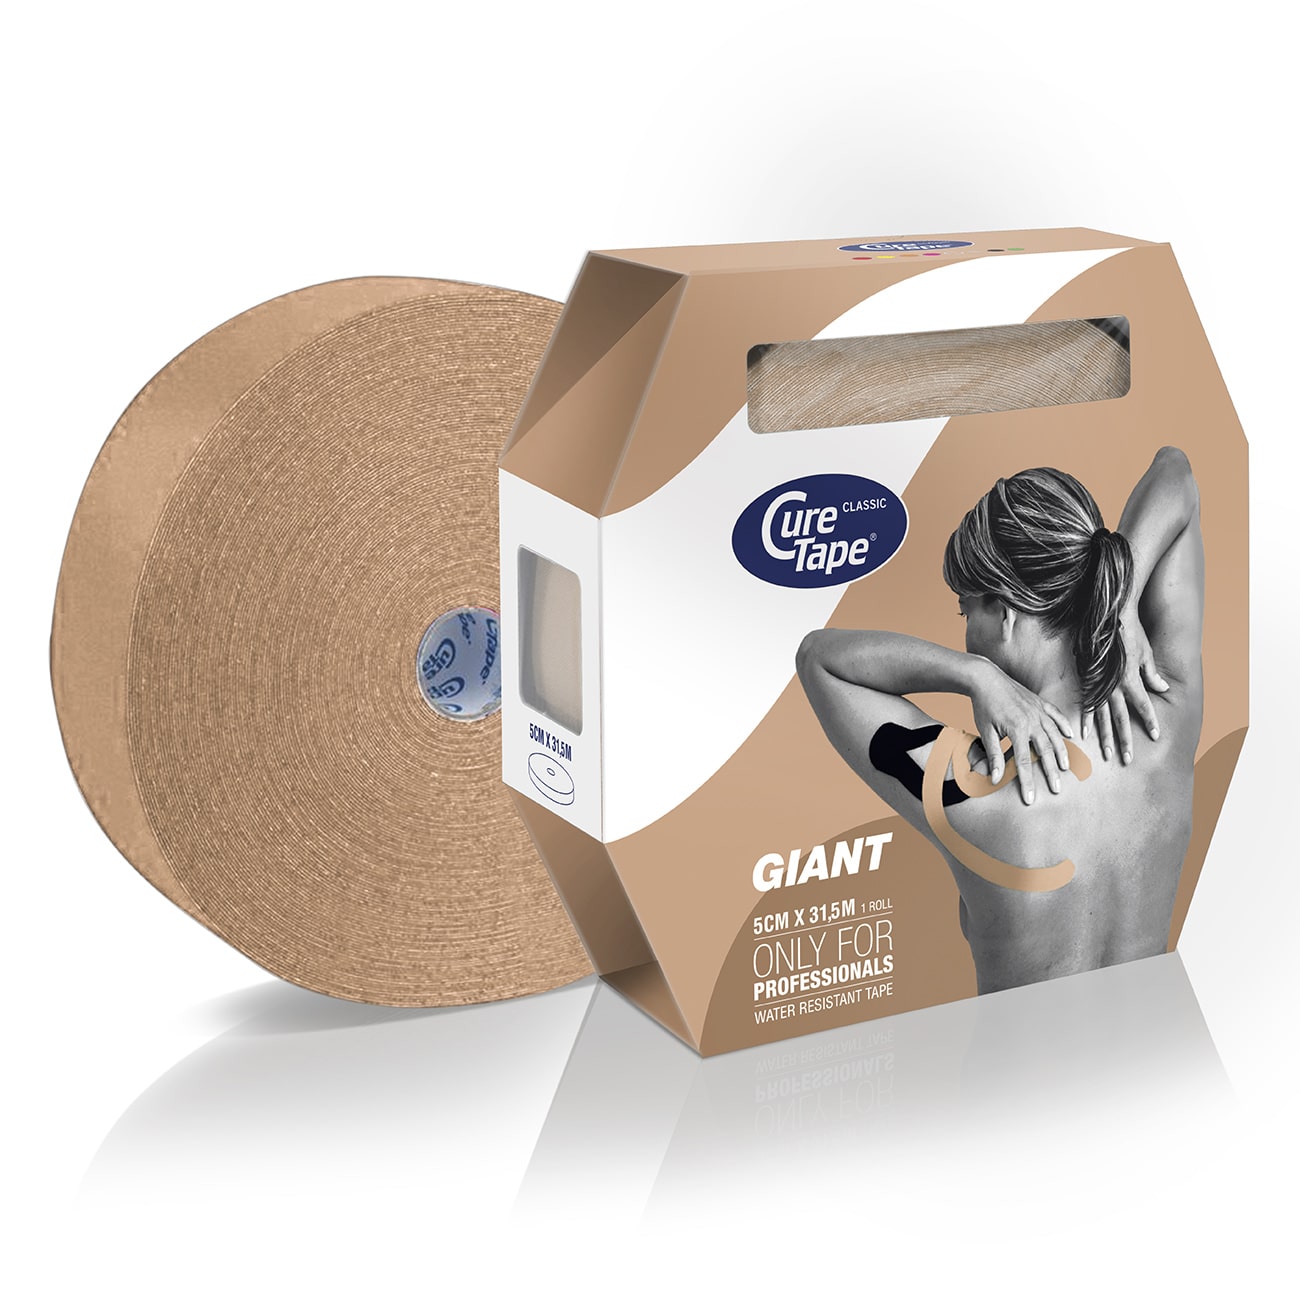 curetape-kinesiology-tape-classic-giant-pack-roll-beige